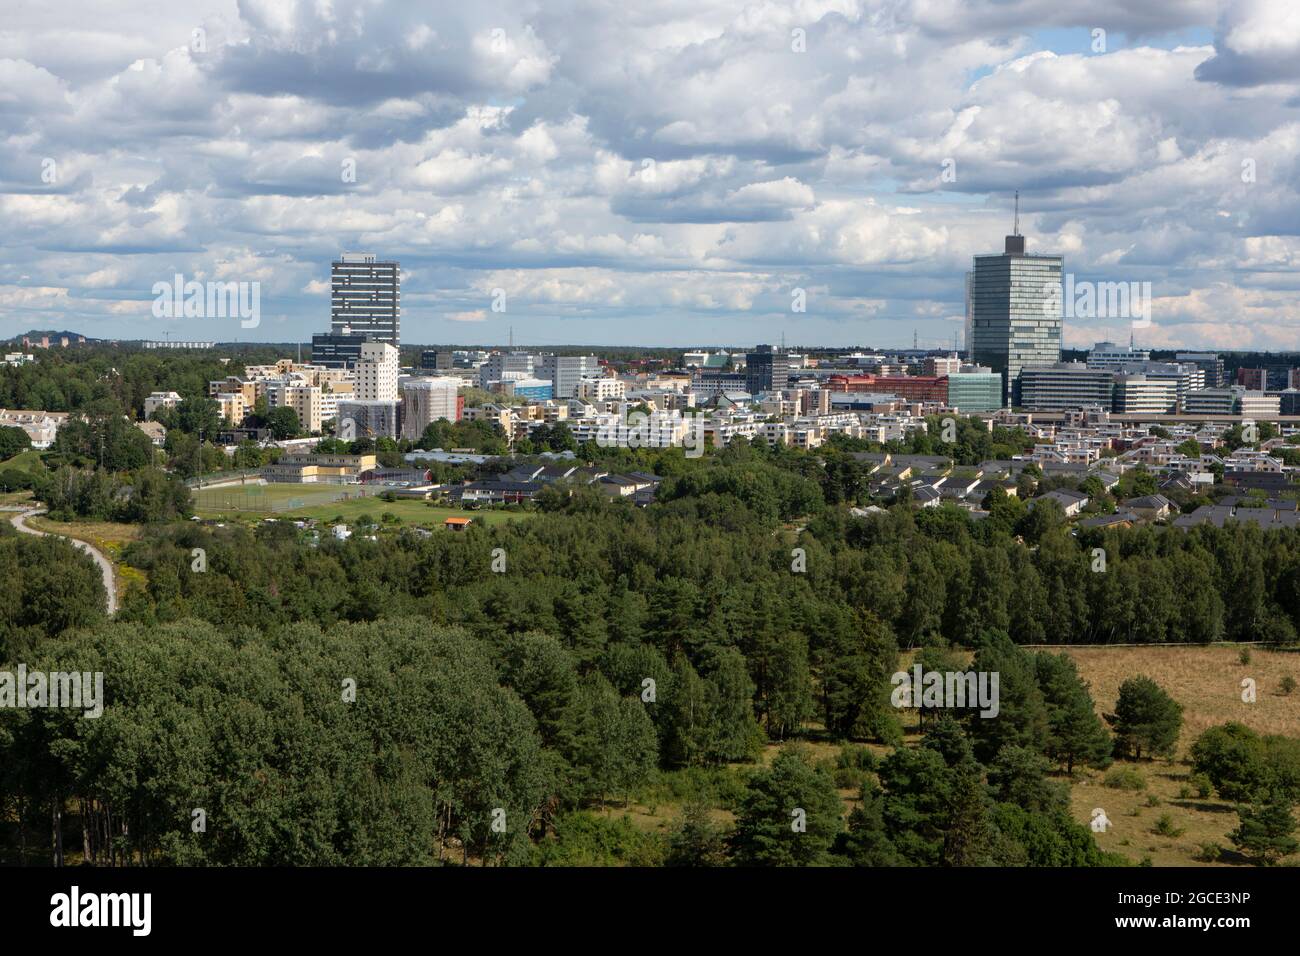 View of Kista with Kista Tower and Kista Torn. Stock Photo